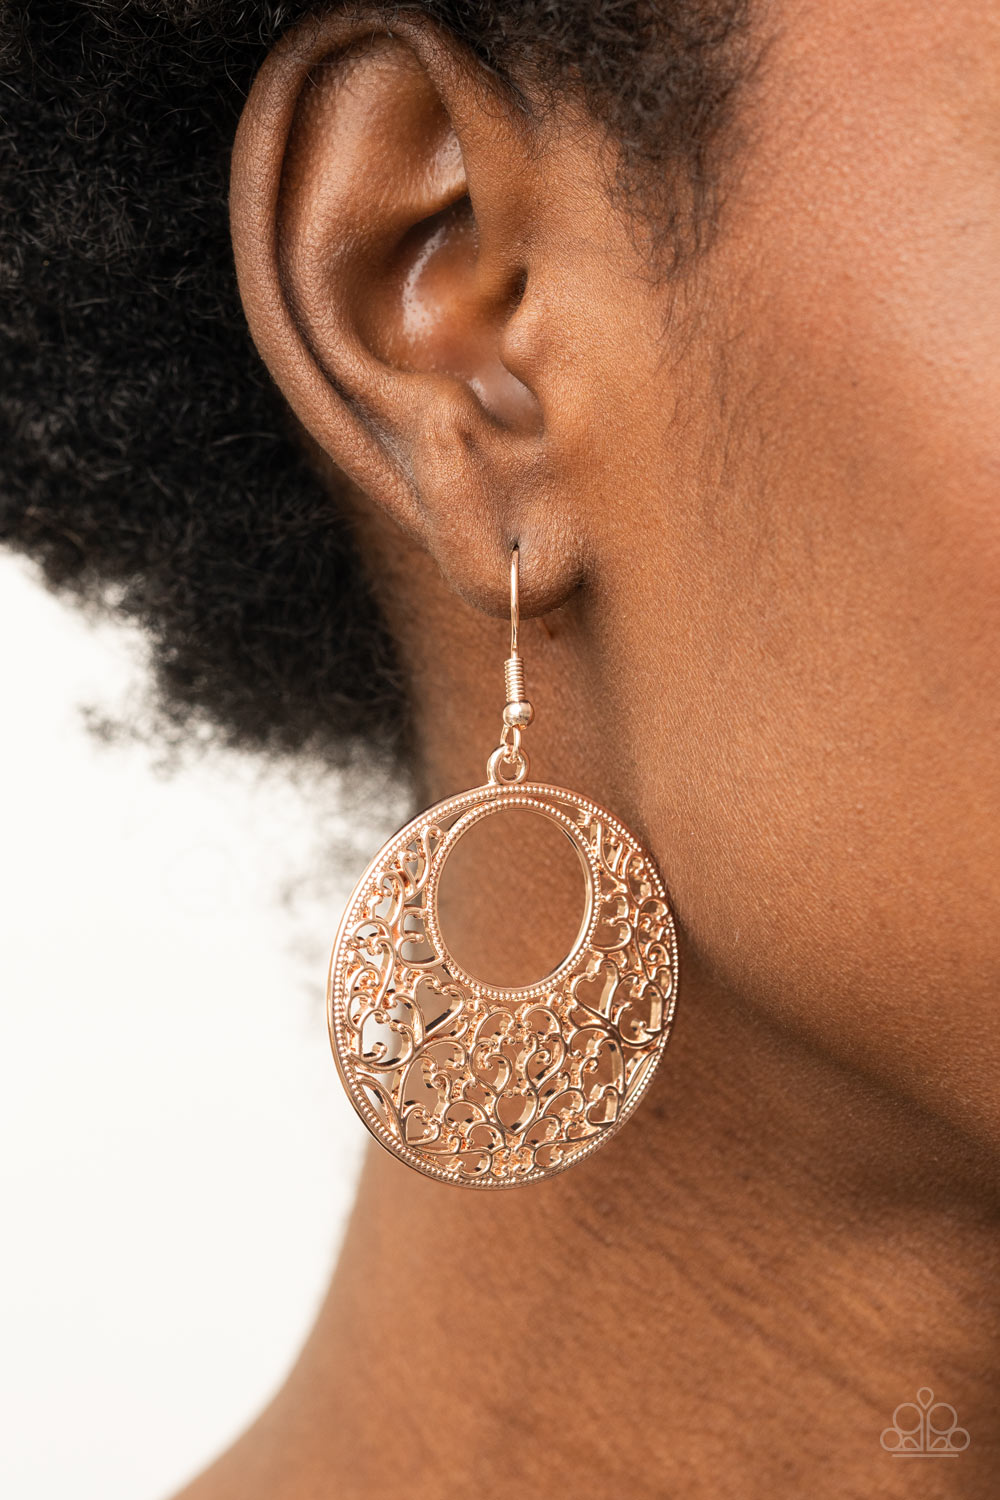 Vineyard Romance - Rose Gold Filigree Earrings shimmery vine-like rose gold filigree climbs the inside of a studded circular frame, creating a whimsical centerpiece. Earring attaches to a standard fishhook fitting.  Sold as one pair of earrings.